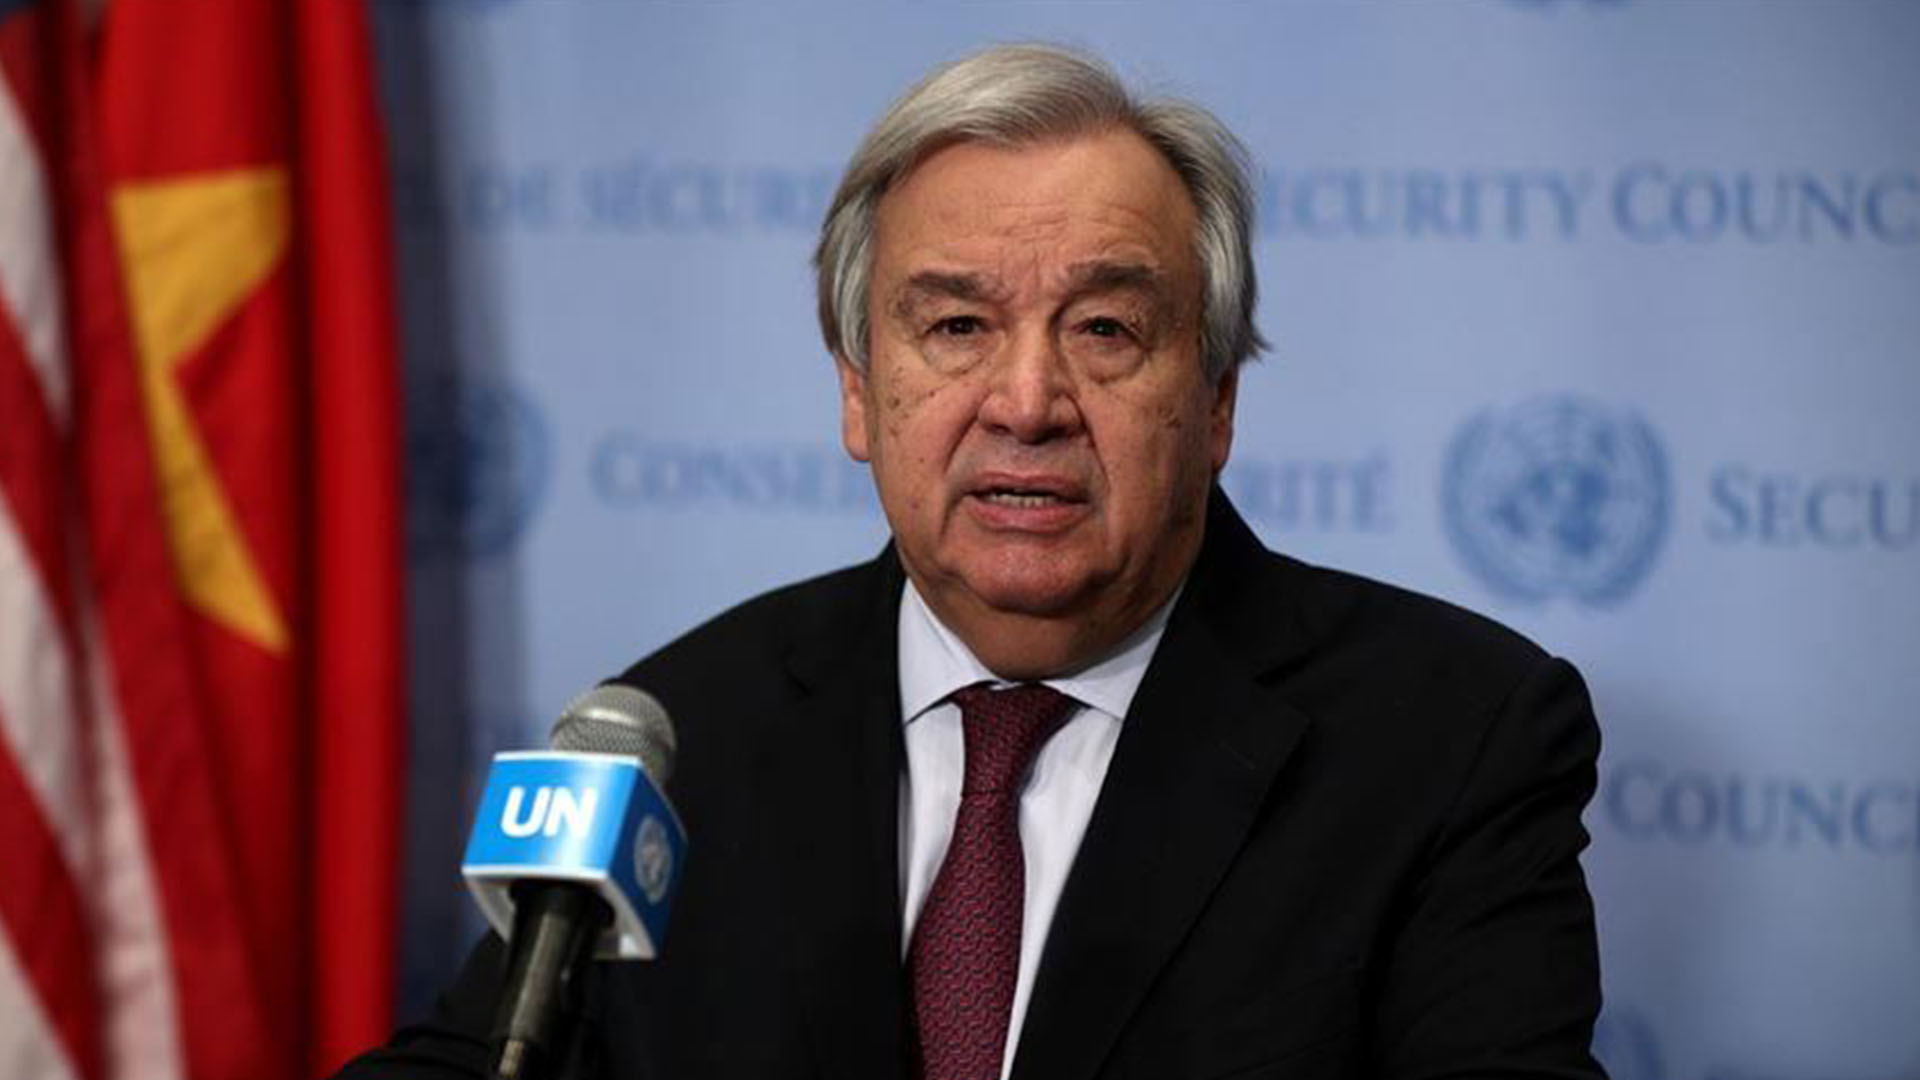 U.N. chief calls on Israel to abandon West Bank annexation plan